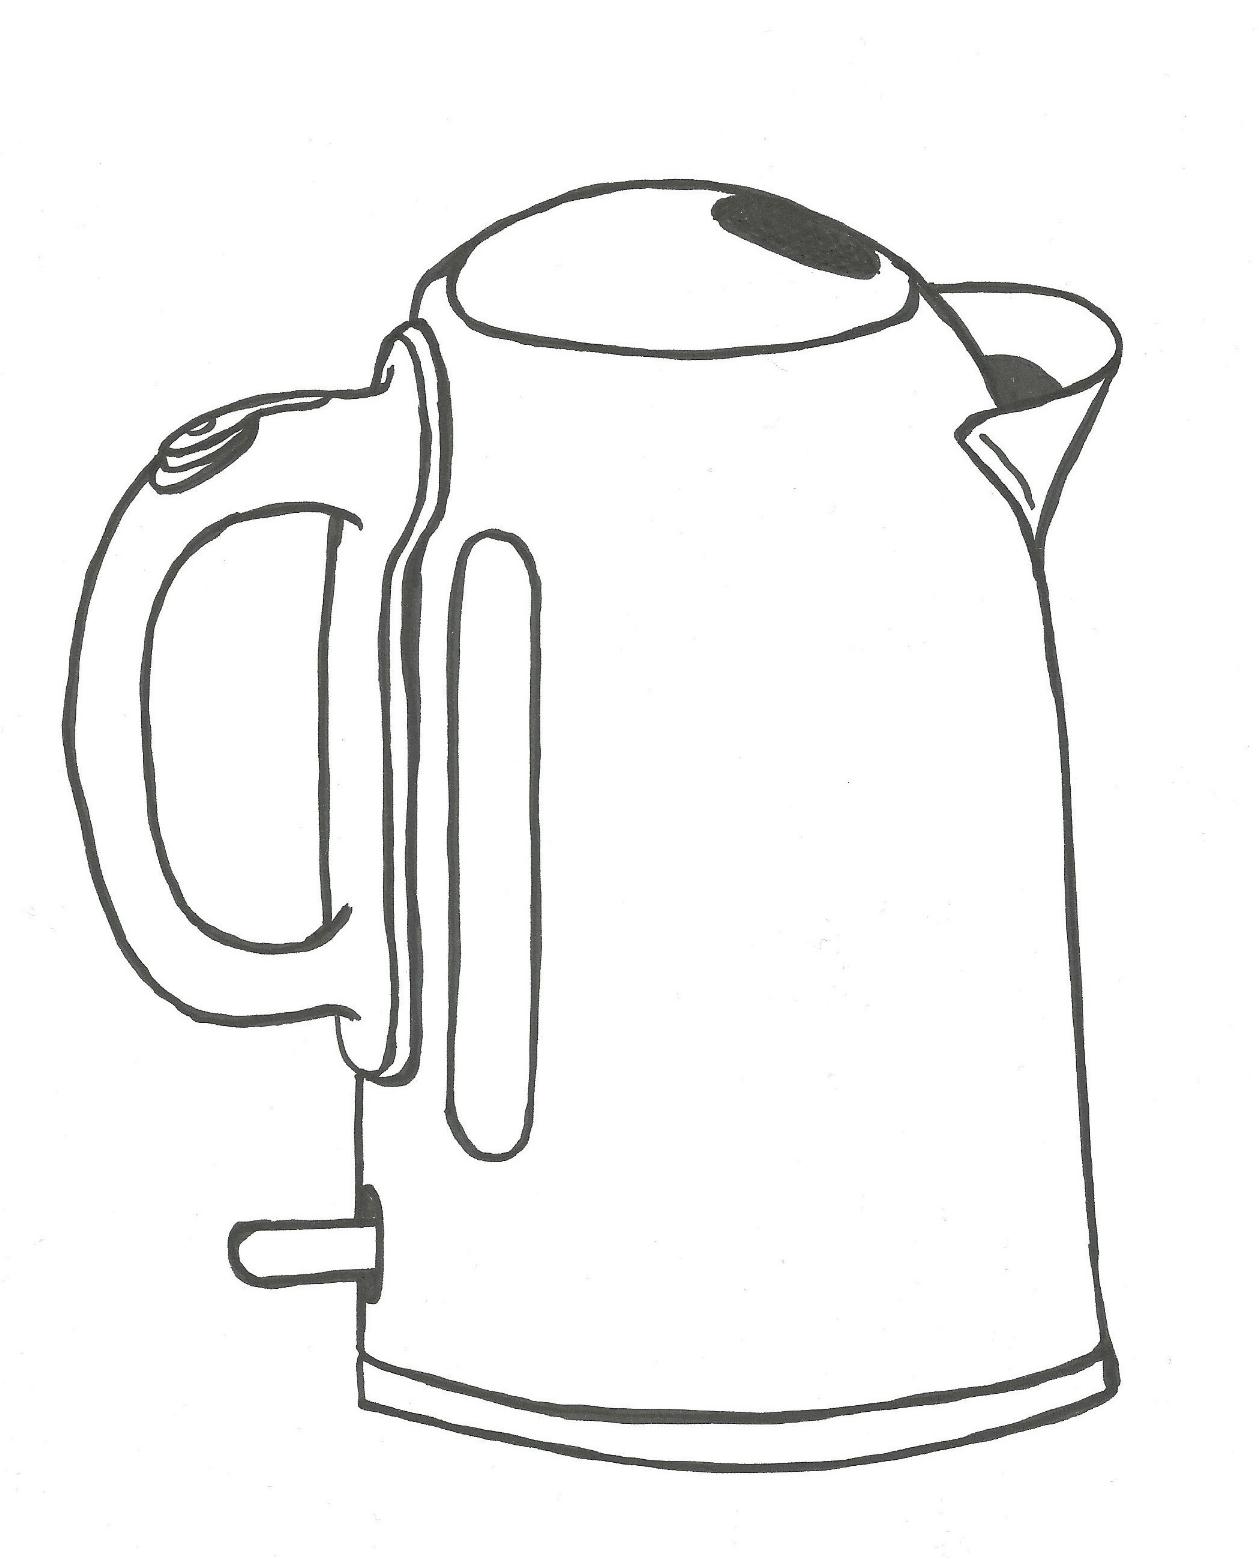 June 20, 2013 - Today's challenge was to draw something from the kitchen without erasing in any way, and thus, this kettle emerged.